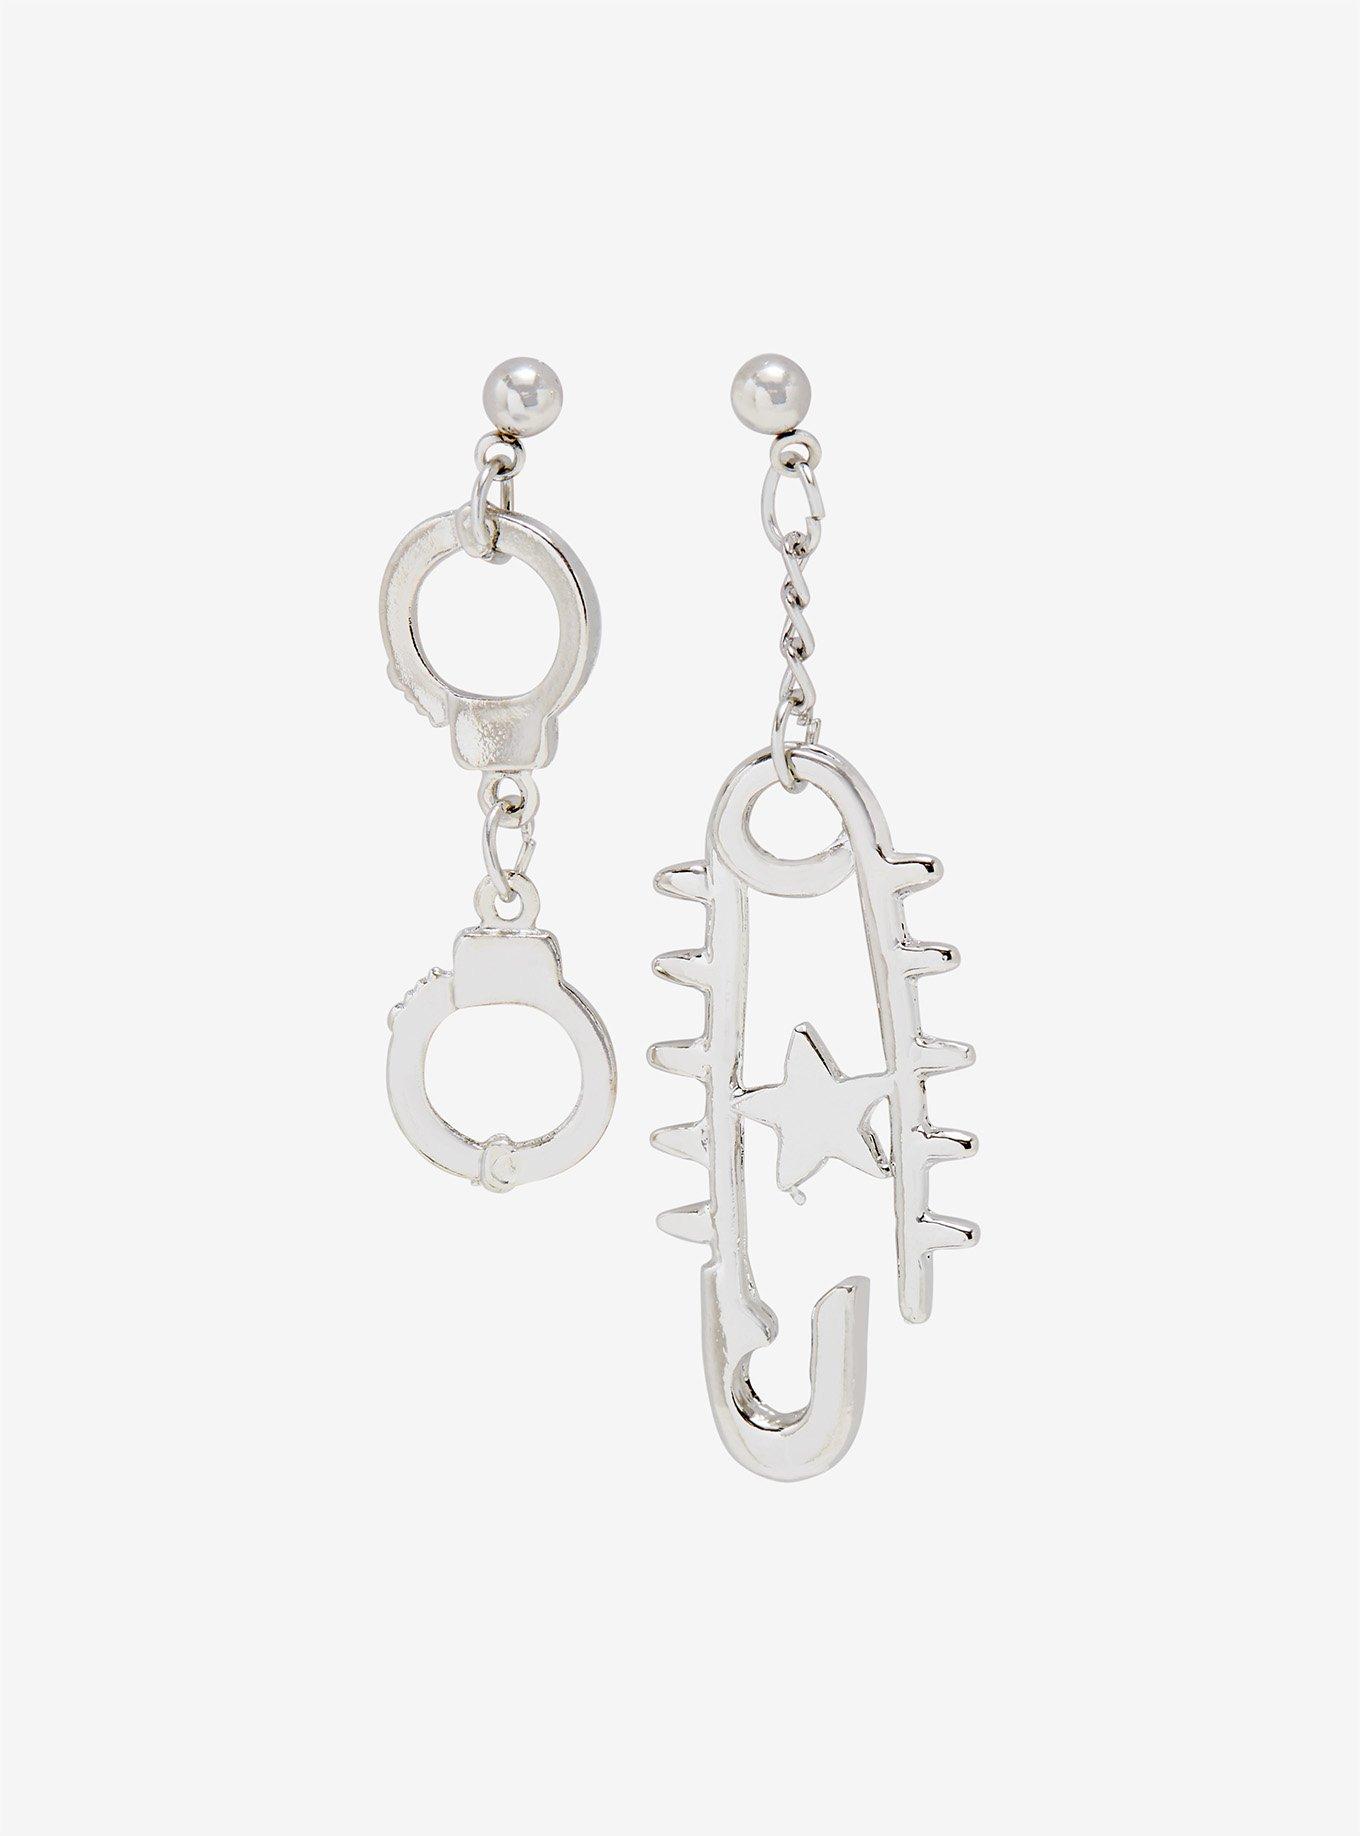 Handcuffs & Safety Pin Mismatch Earrings, , hi-res